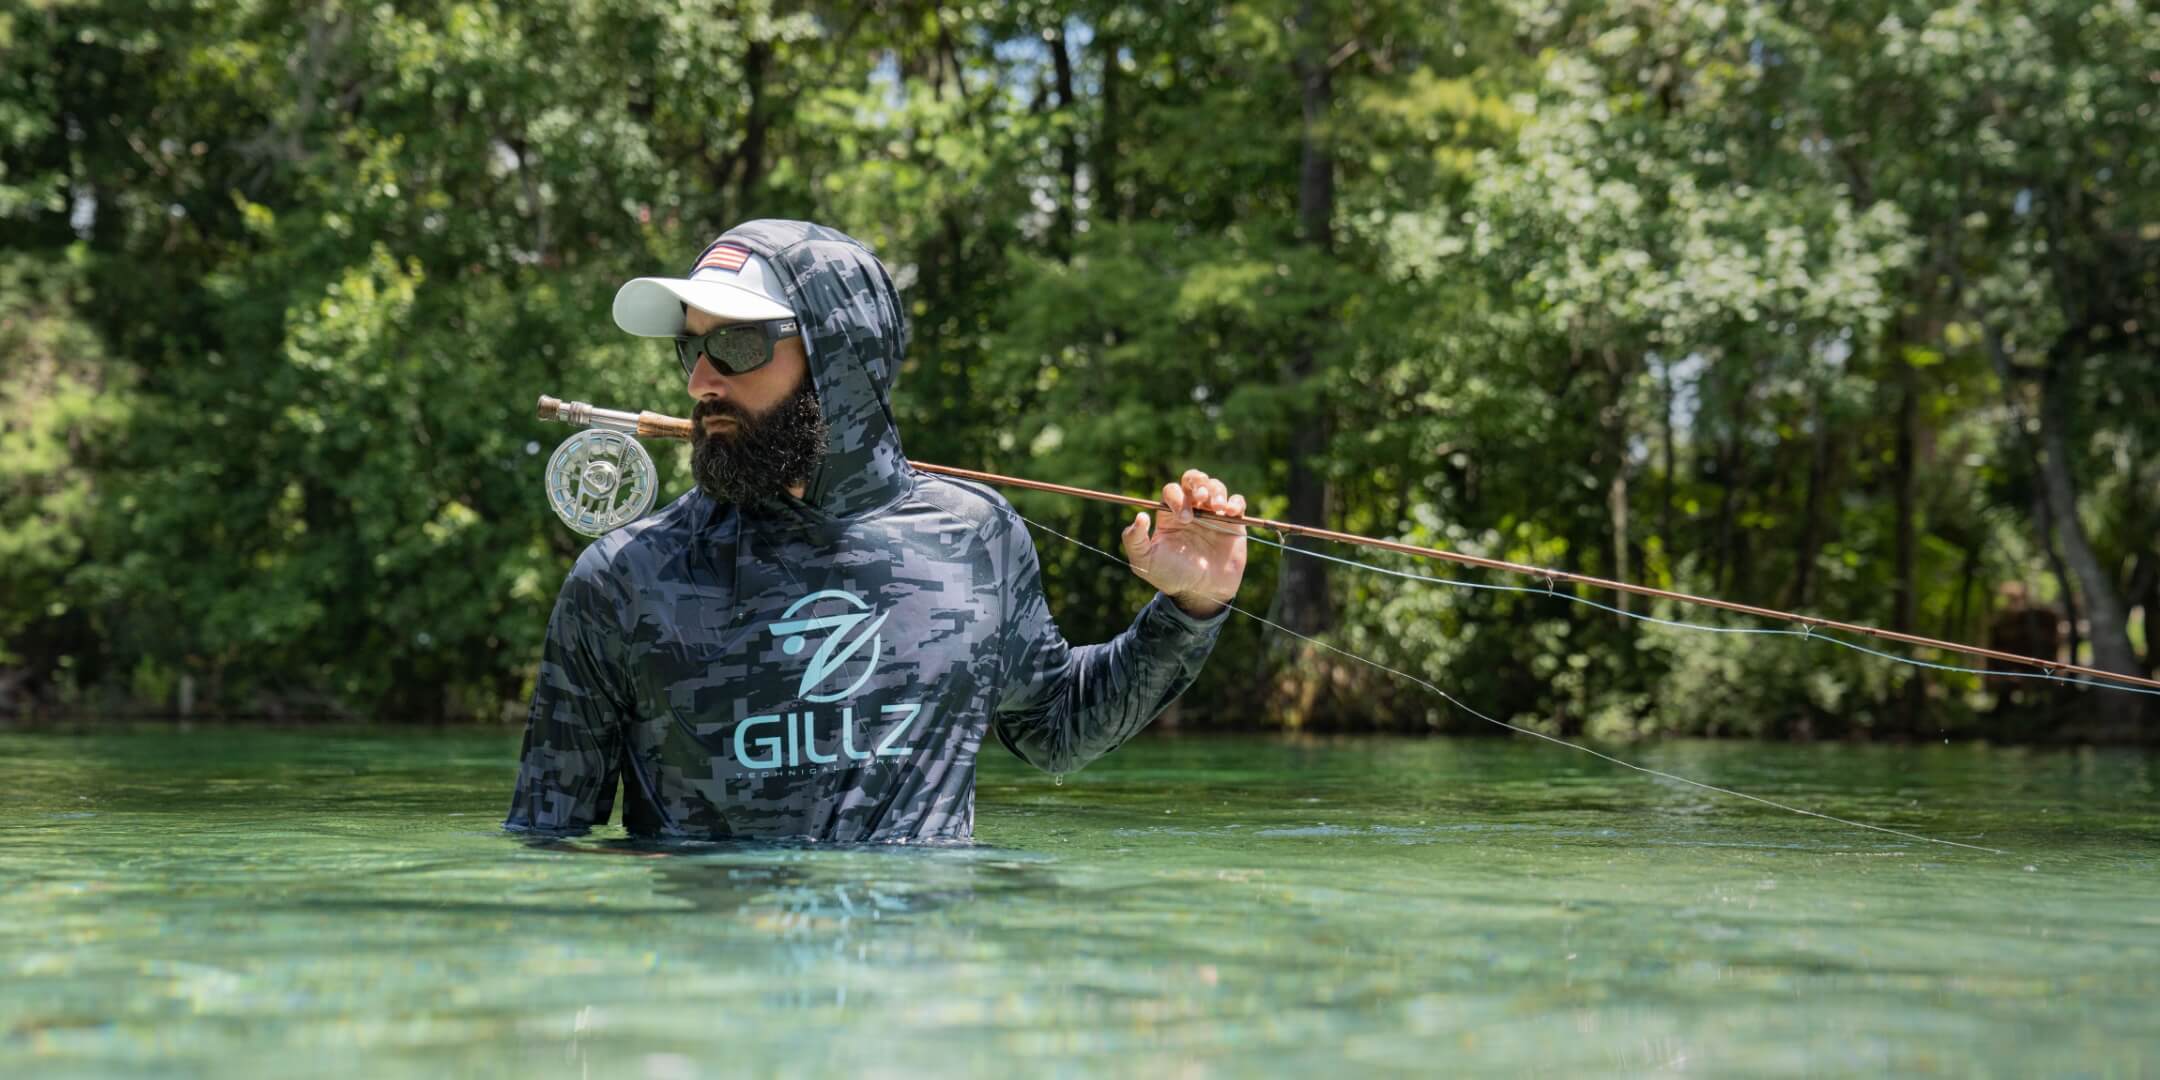 Fly Fishing Clearance - Fly Fishing & Outdoor Gear on Sale